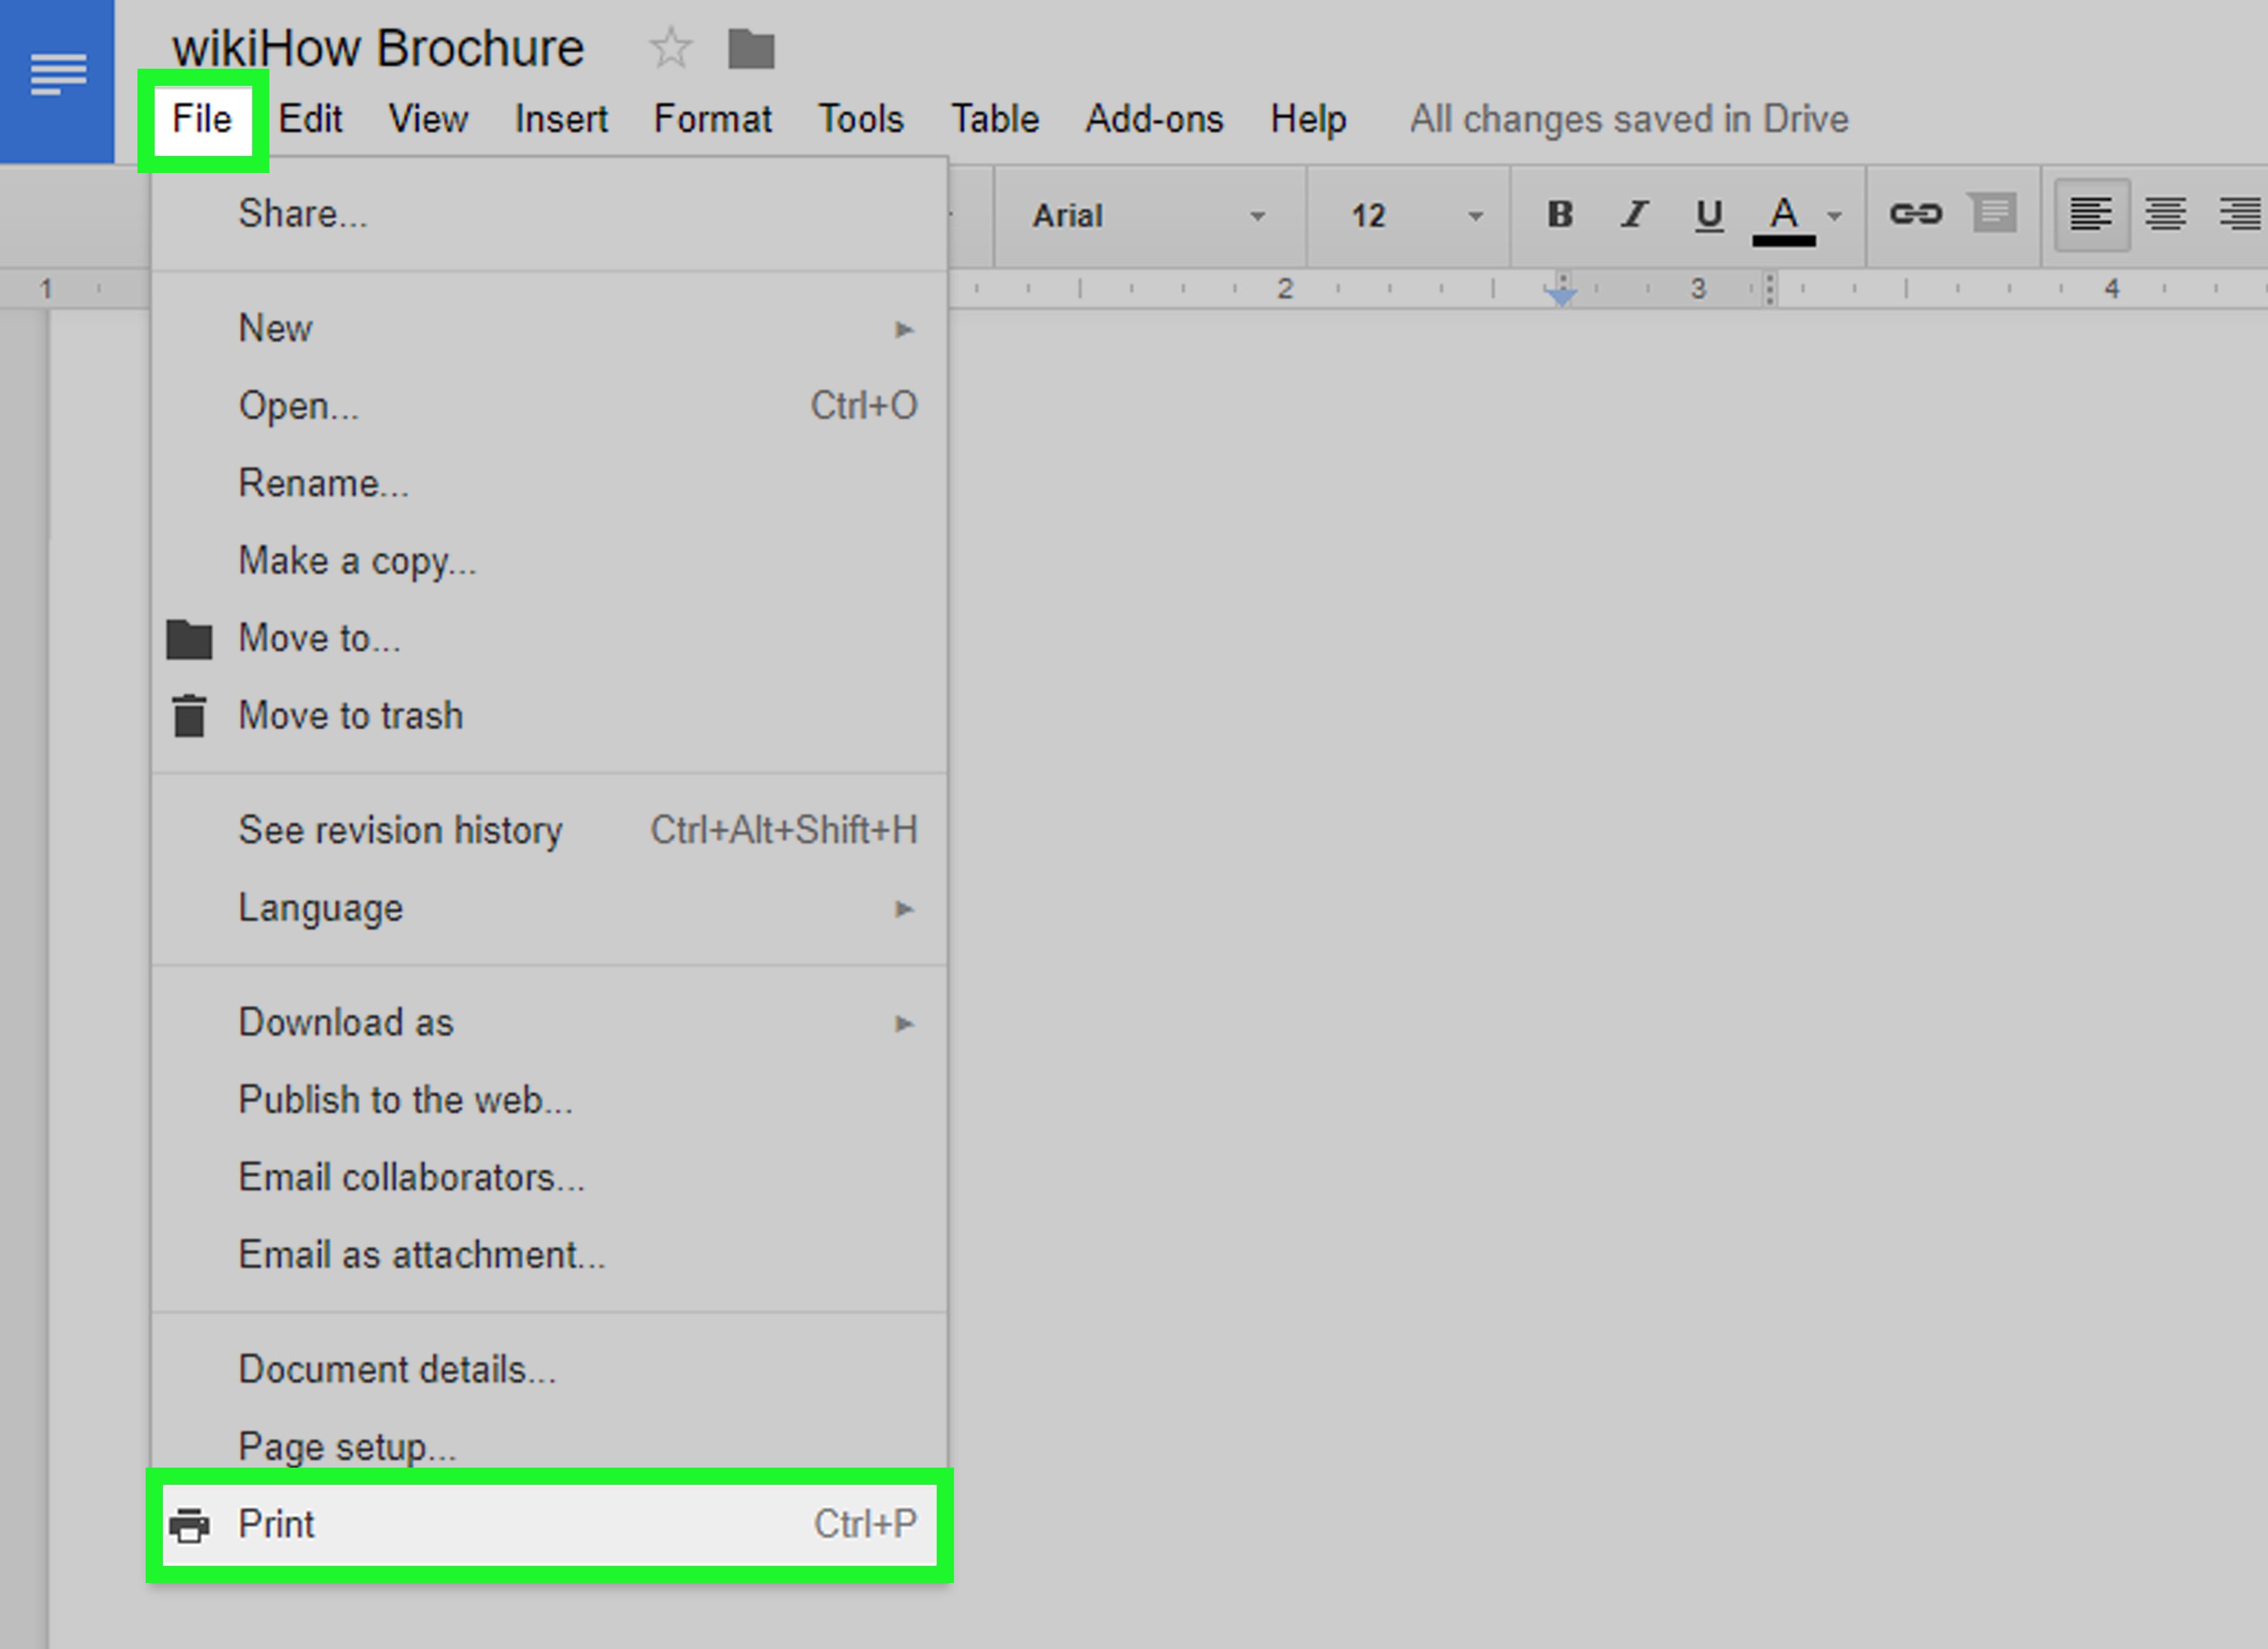 Brochure Template for Google Docs How to Make A Brochure Using Google Docs with